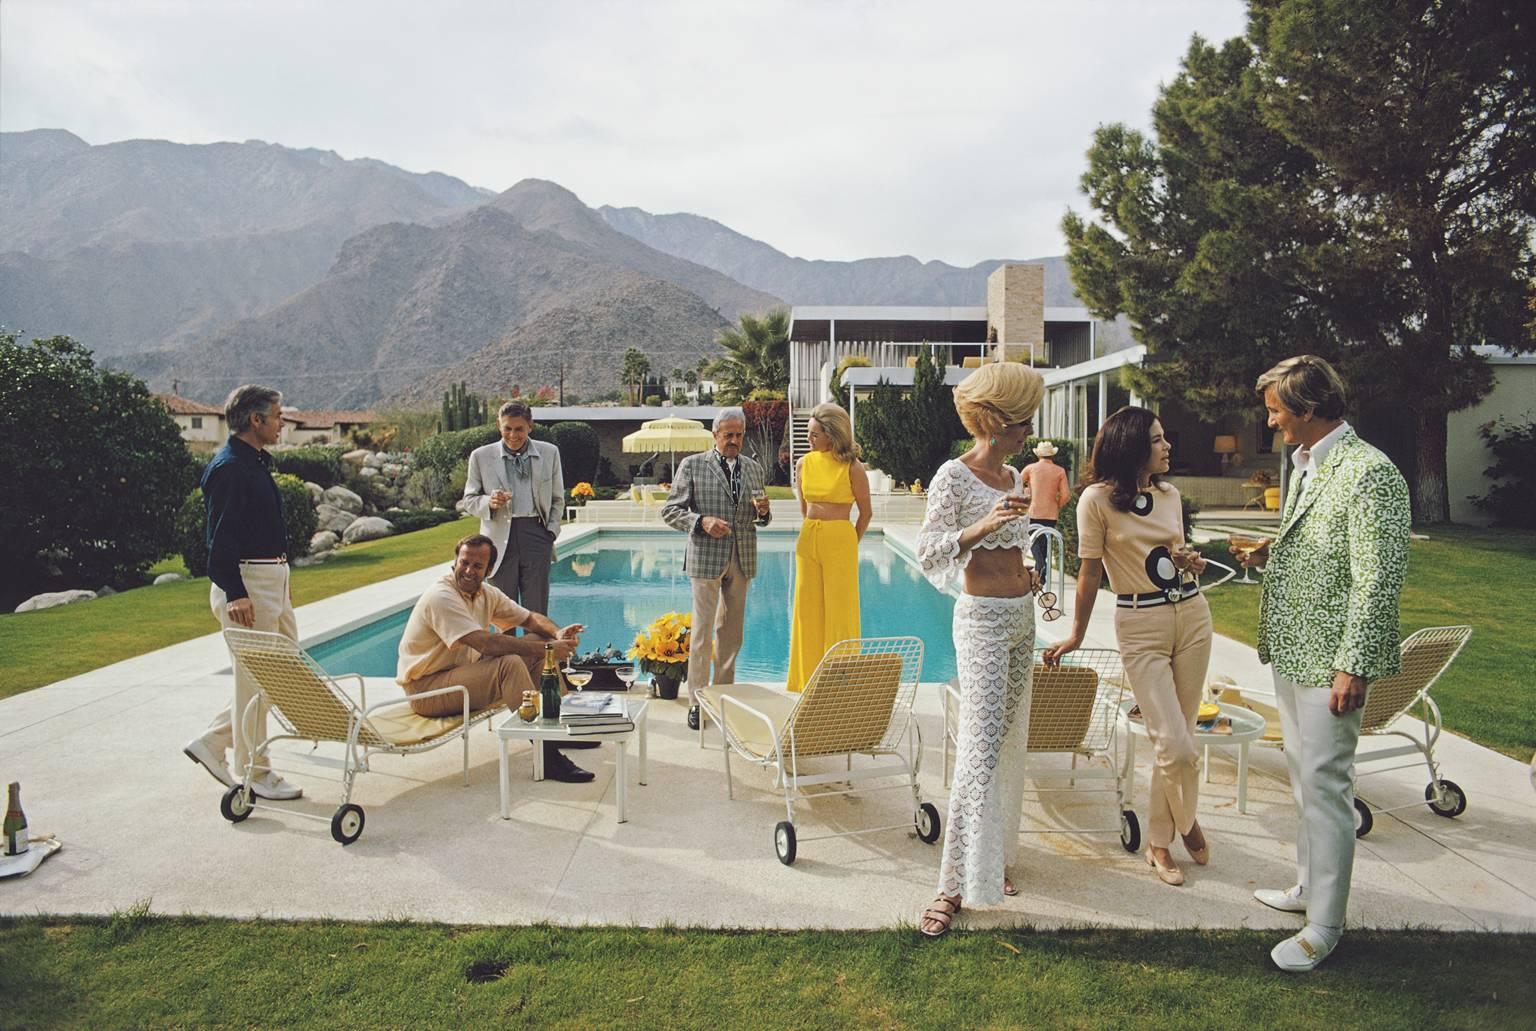 Slim Aarons Figurative Photograph - 'Desert House Party' (Estate Stamped Edition)